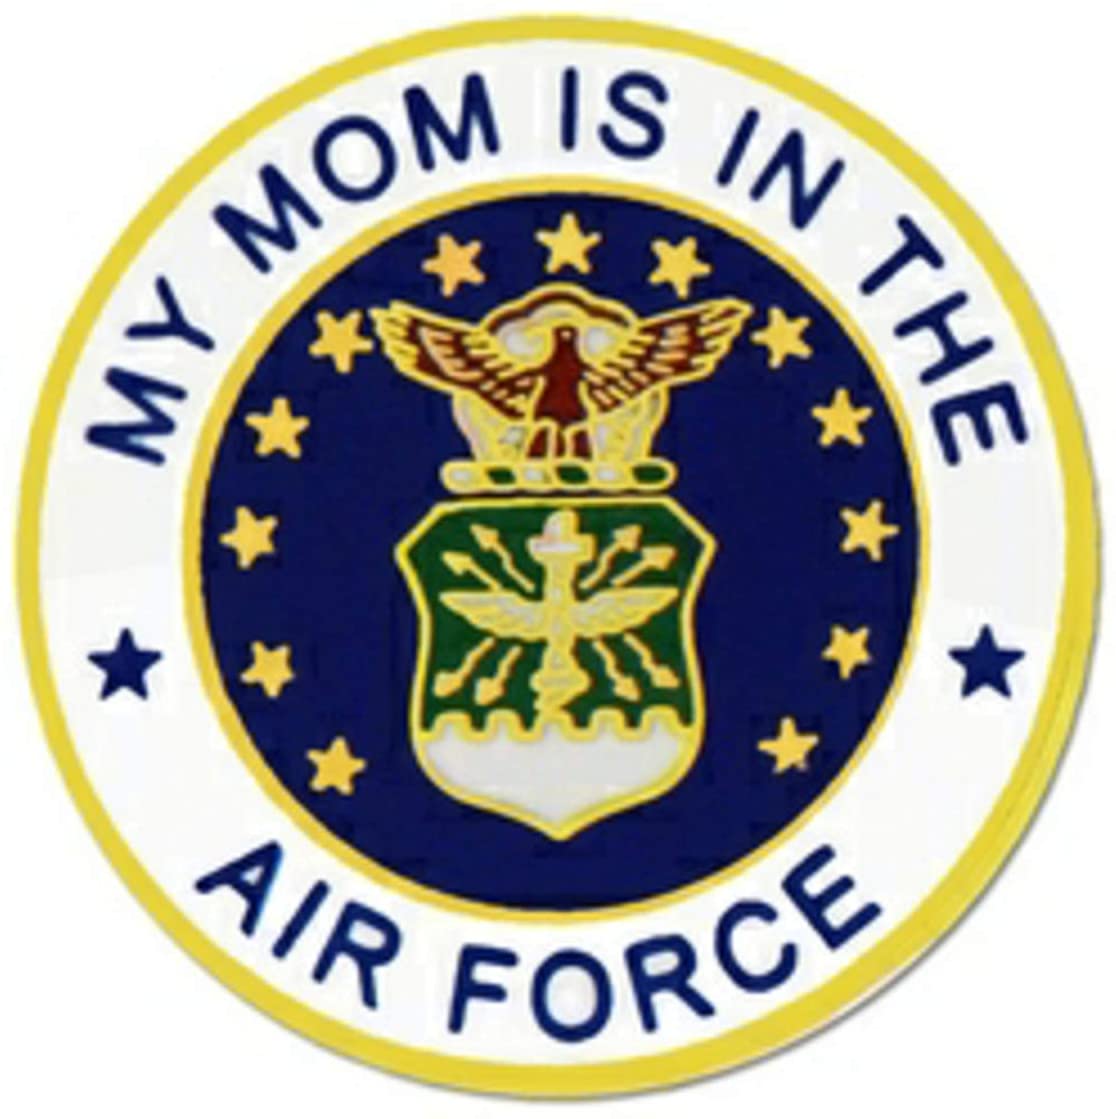 "My Mom is in the Air Force" Small Pin - CLEARANCE!